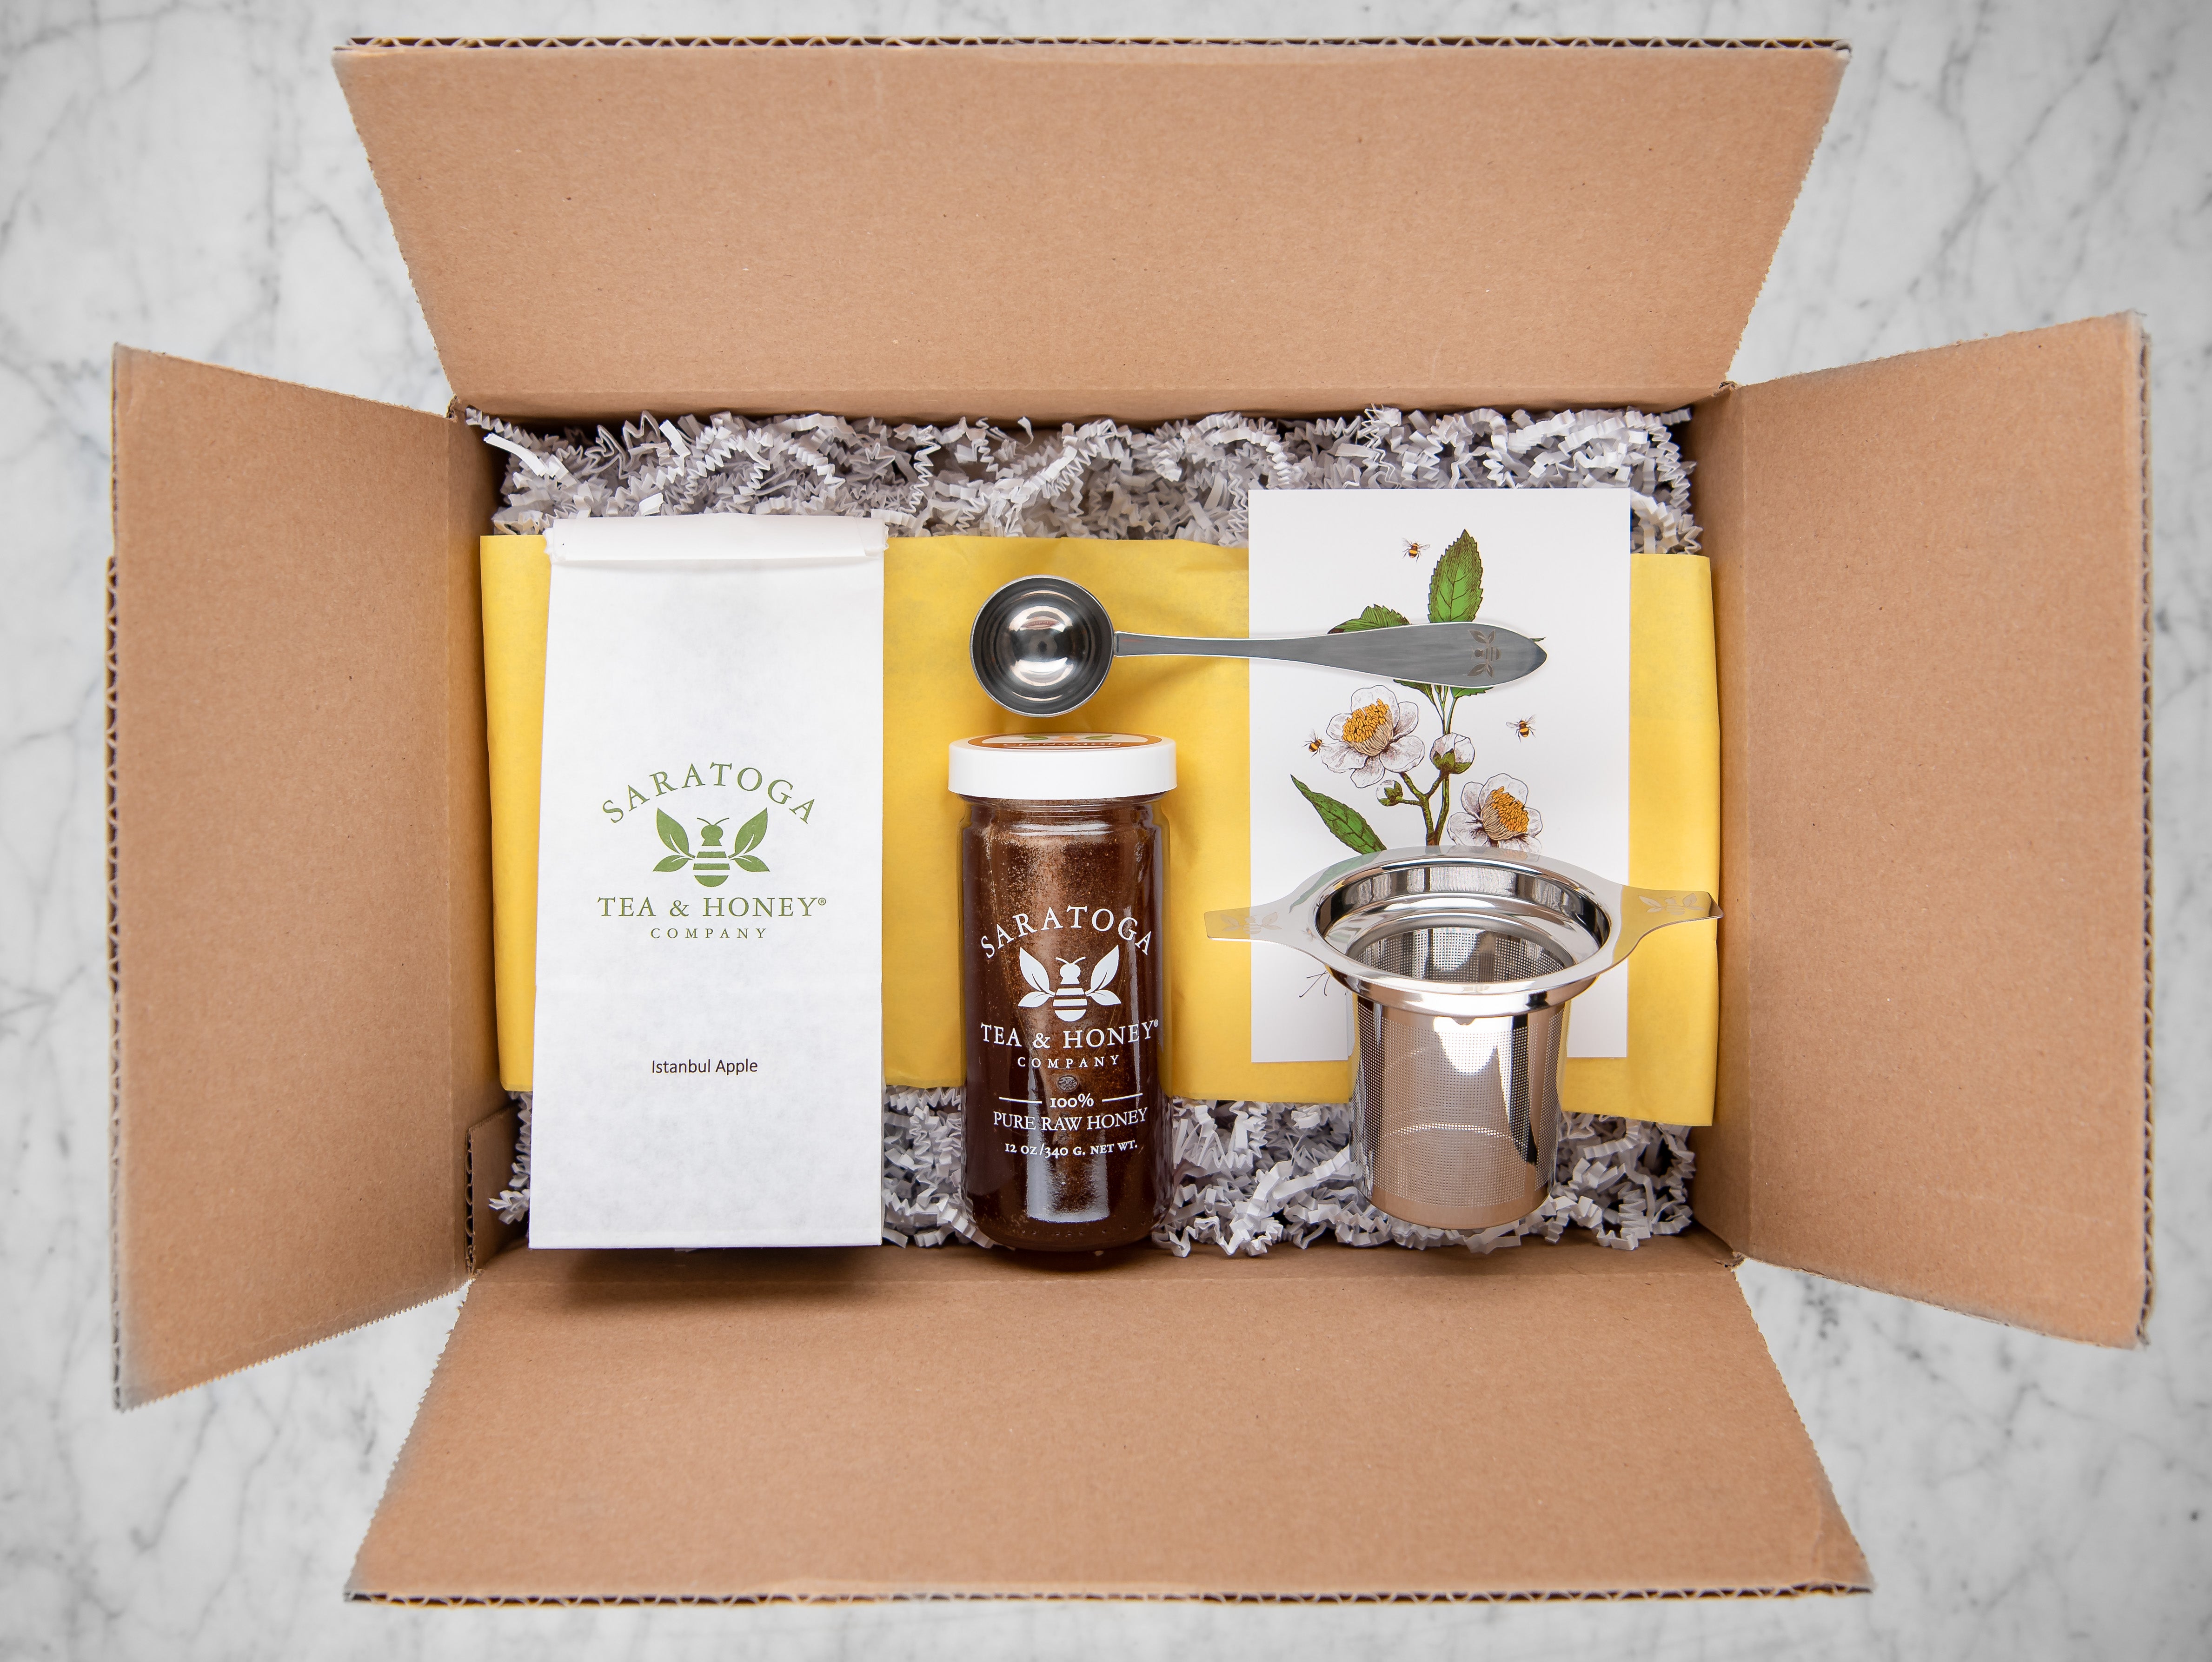 fall seasons tea and honey box: cardboard box with gift fill, instanbul apple, cinnamon honey, a stainless steel infuser, and a tea scoop